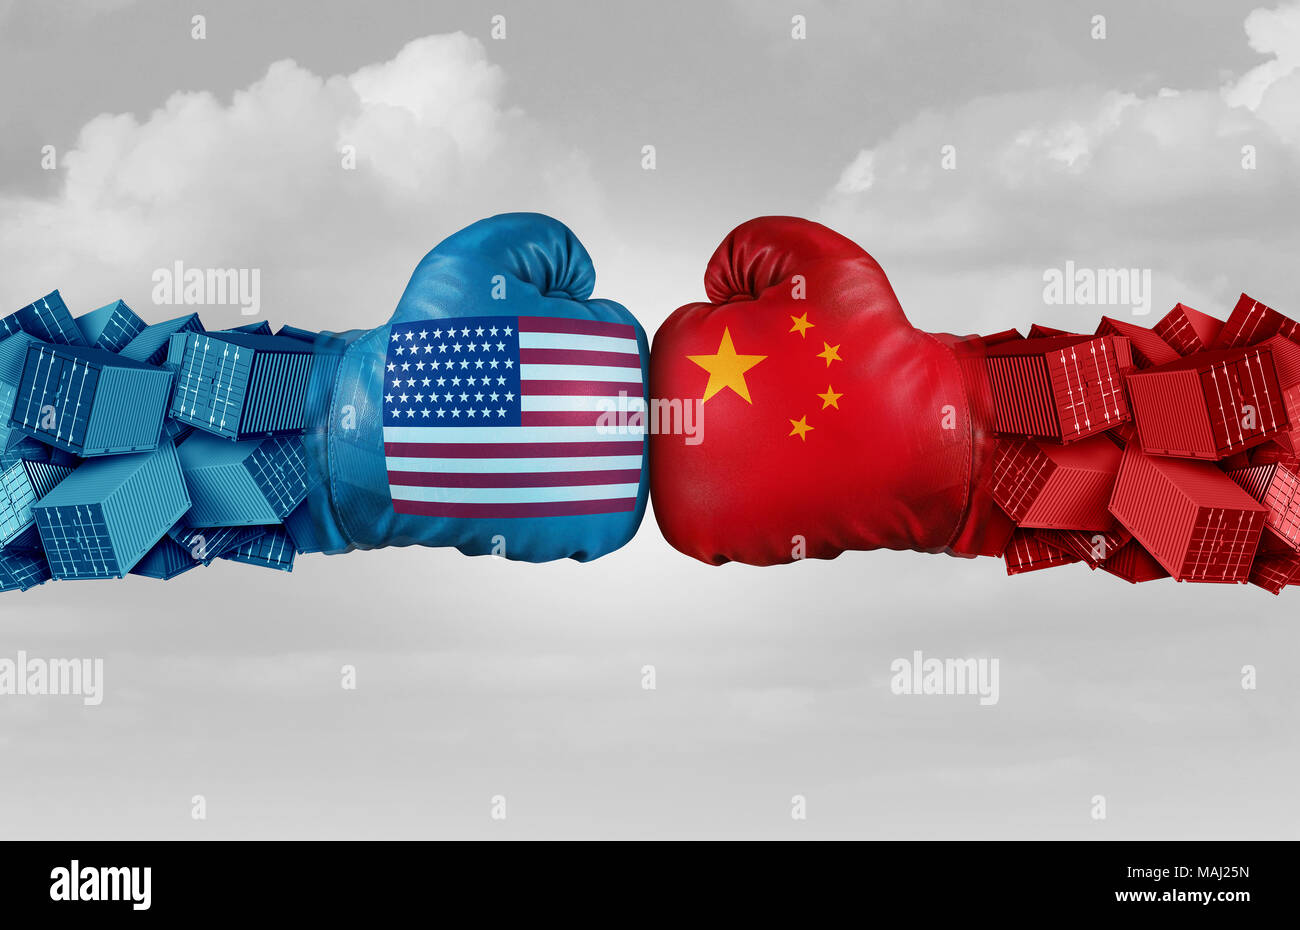 China USA or United States trade and American tariffs conflict with two opposing trading partners as an economic import and exports dispute. Stock Photo